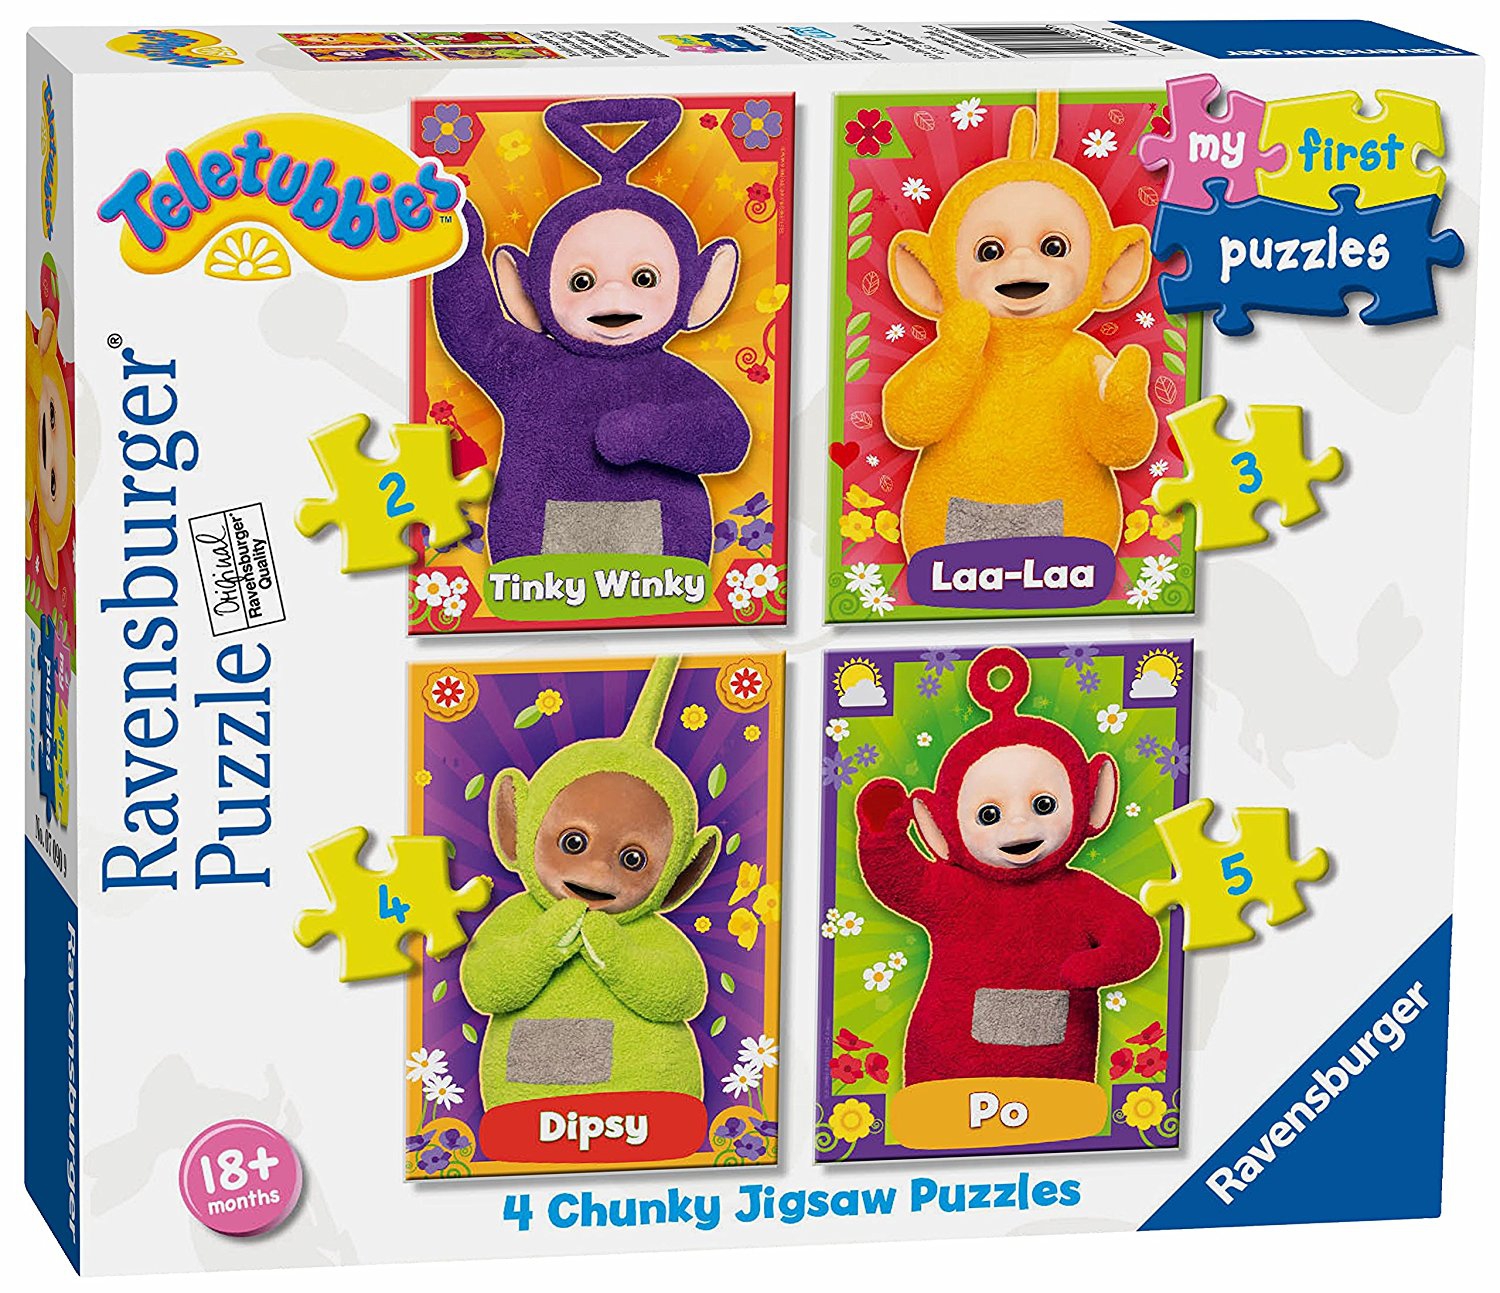 Teletubbies 2 3 4 5 Piece Jigsaw Puzzle Game